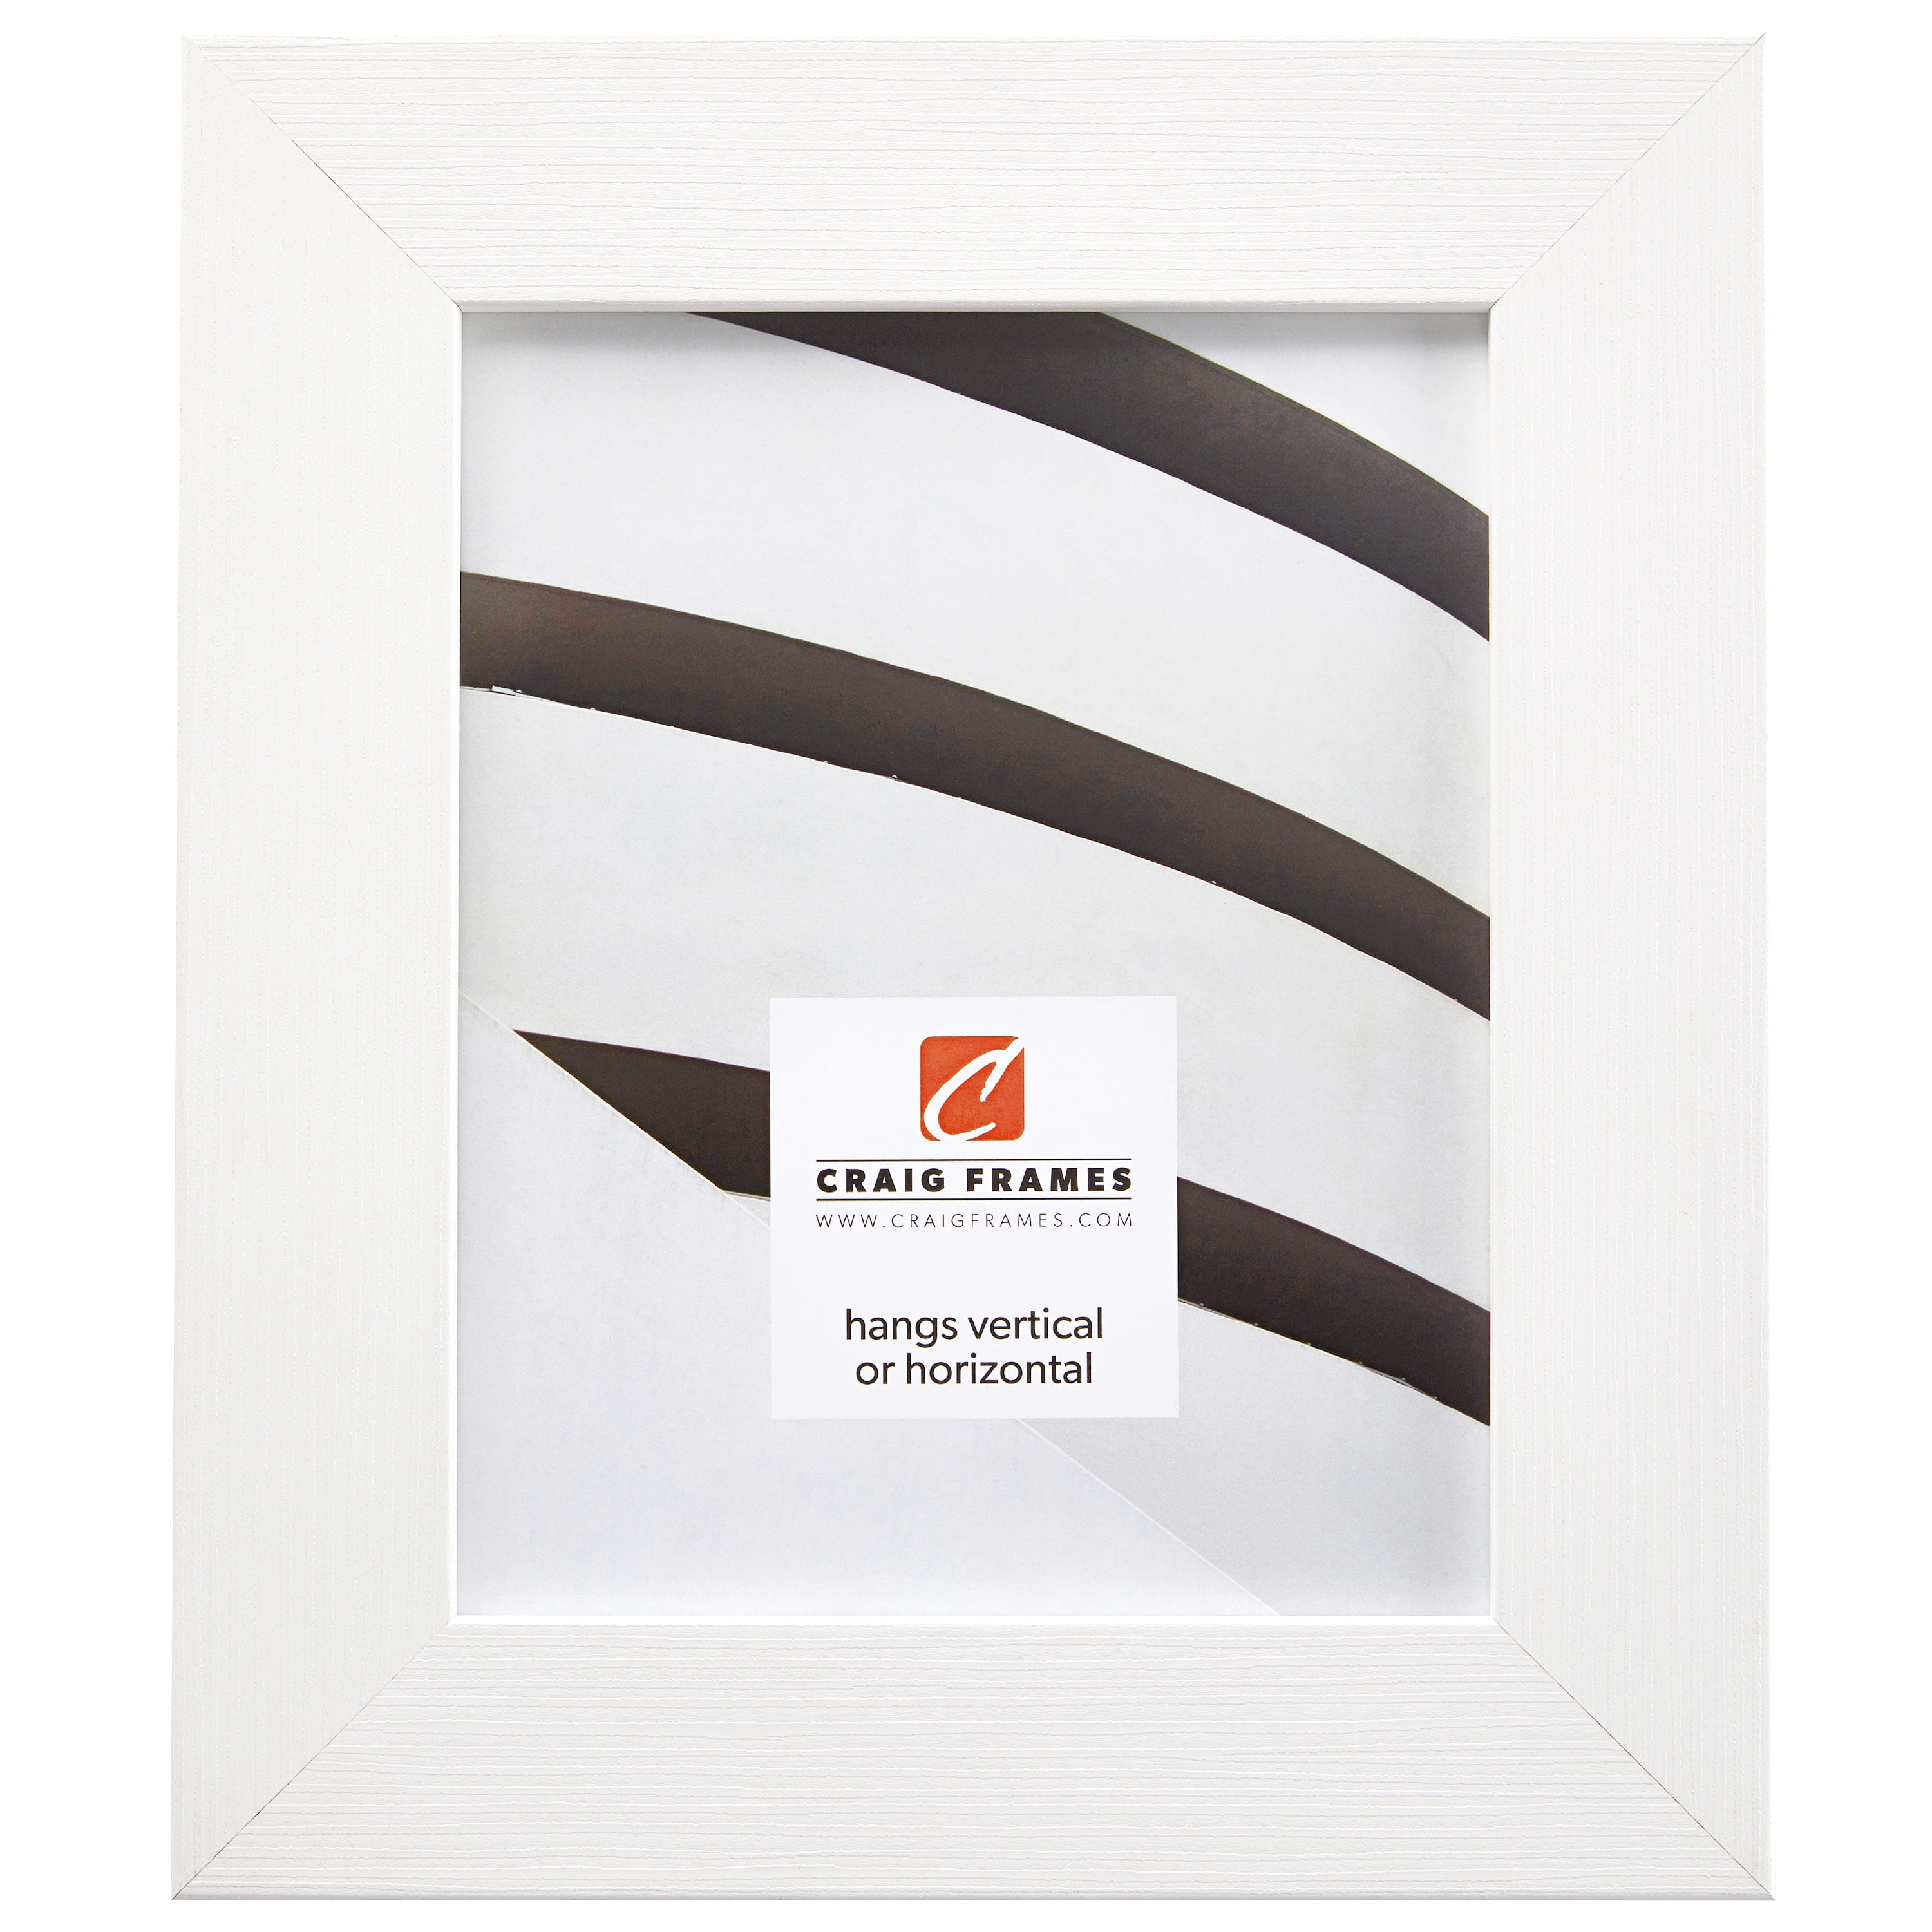 CustomPictureFrames 24x36 - 24 x 36 White Wash Flat Solid Wood Frame with UV Framer's Acrylic & Foam Board Backing - Great for